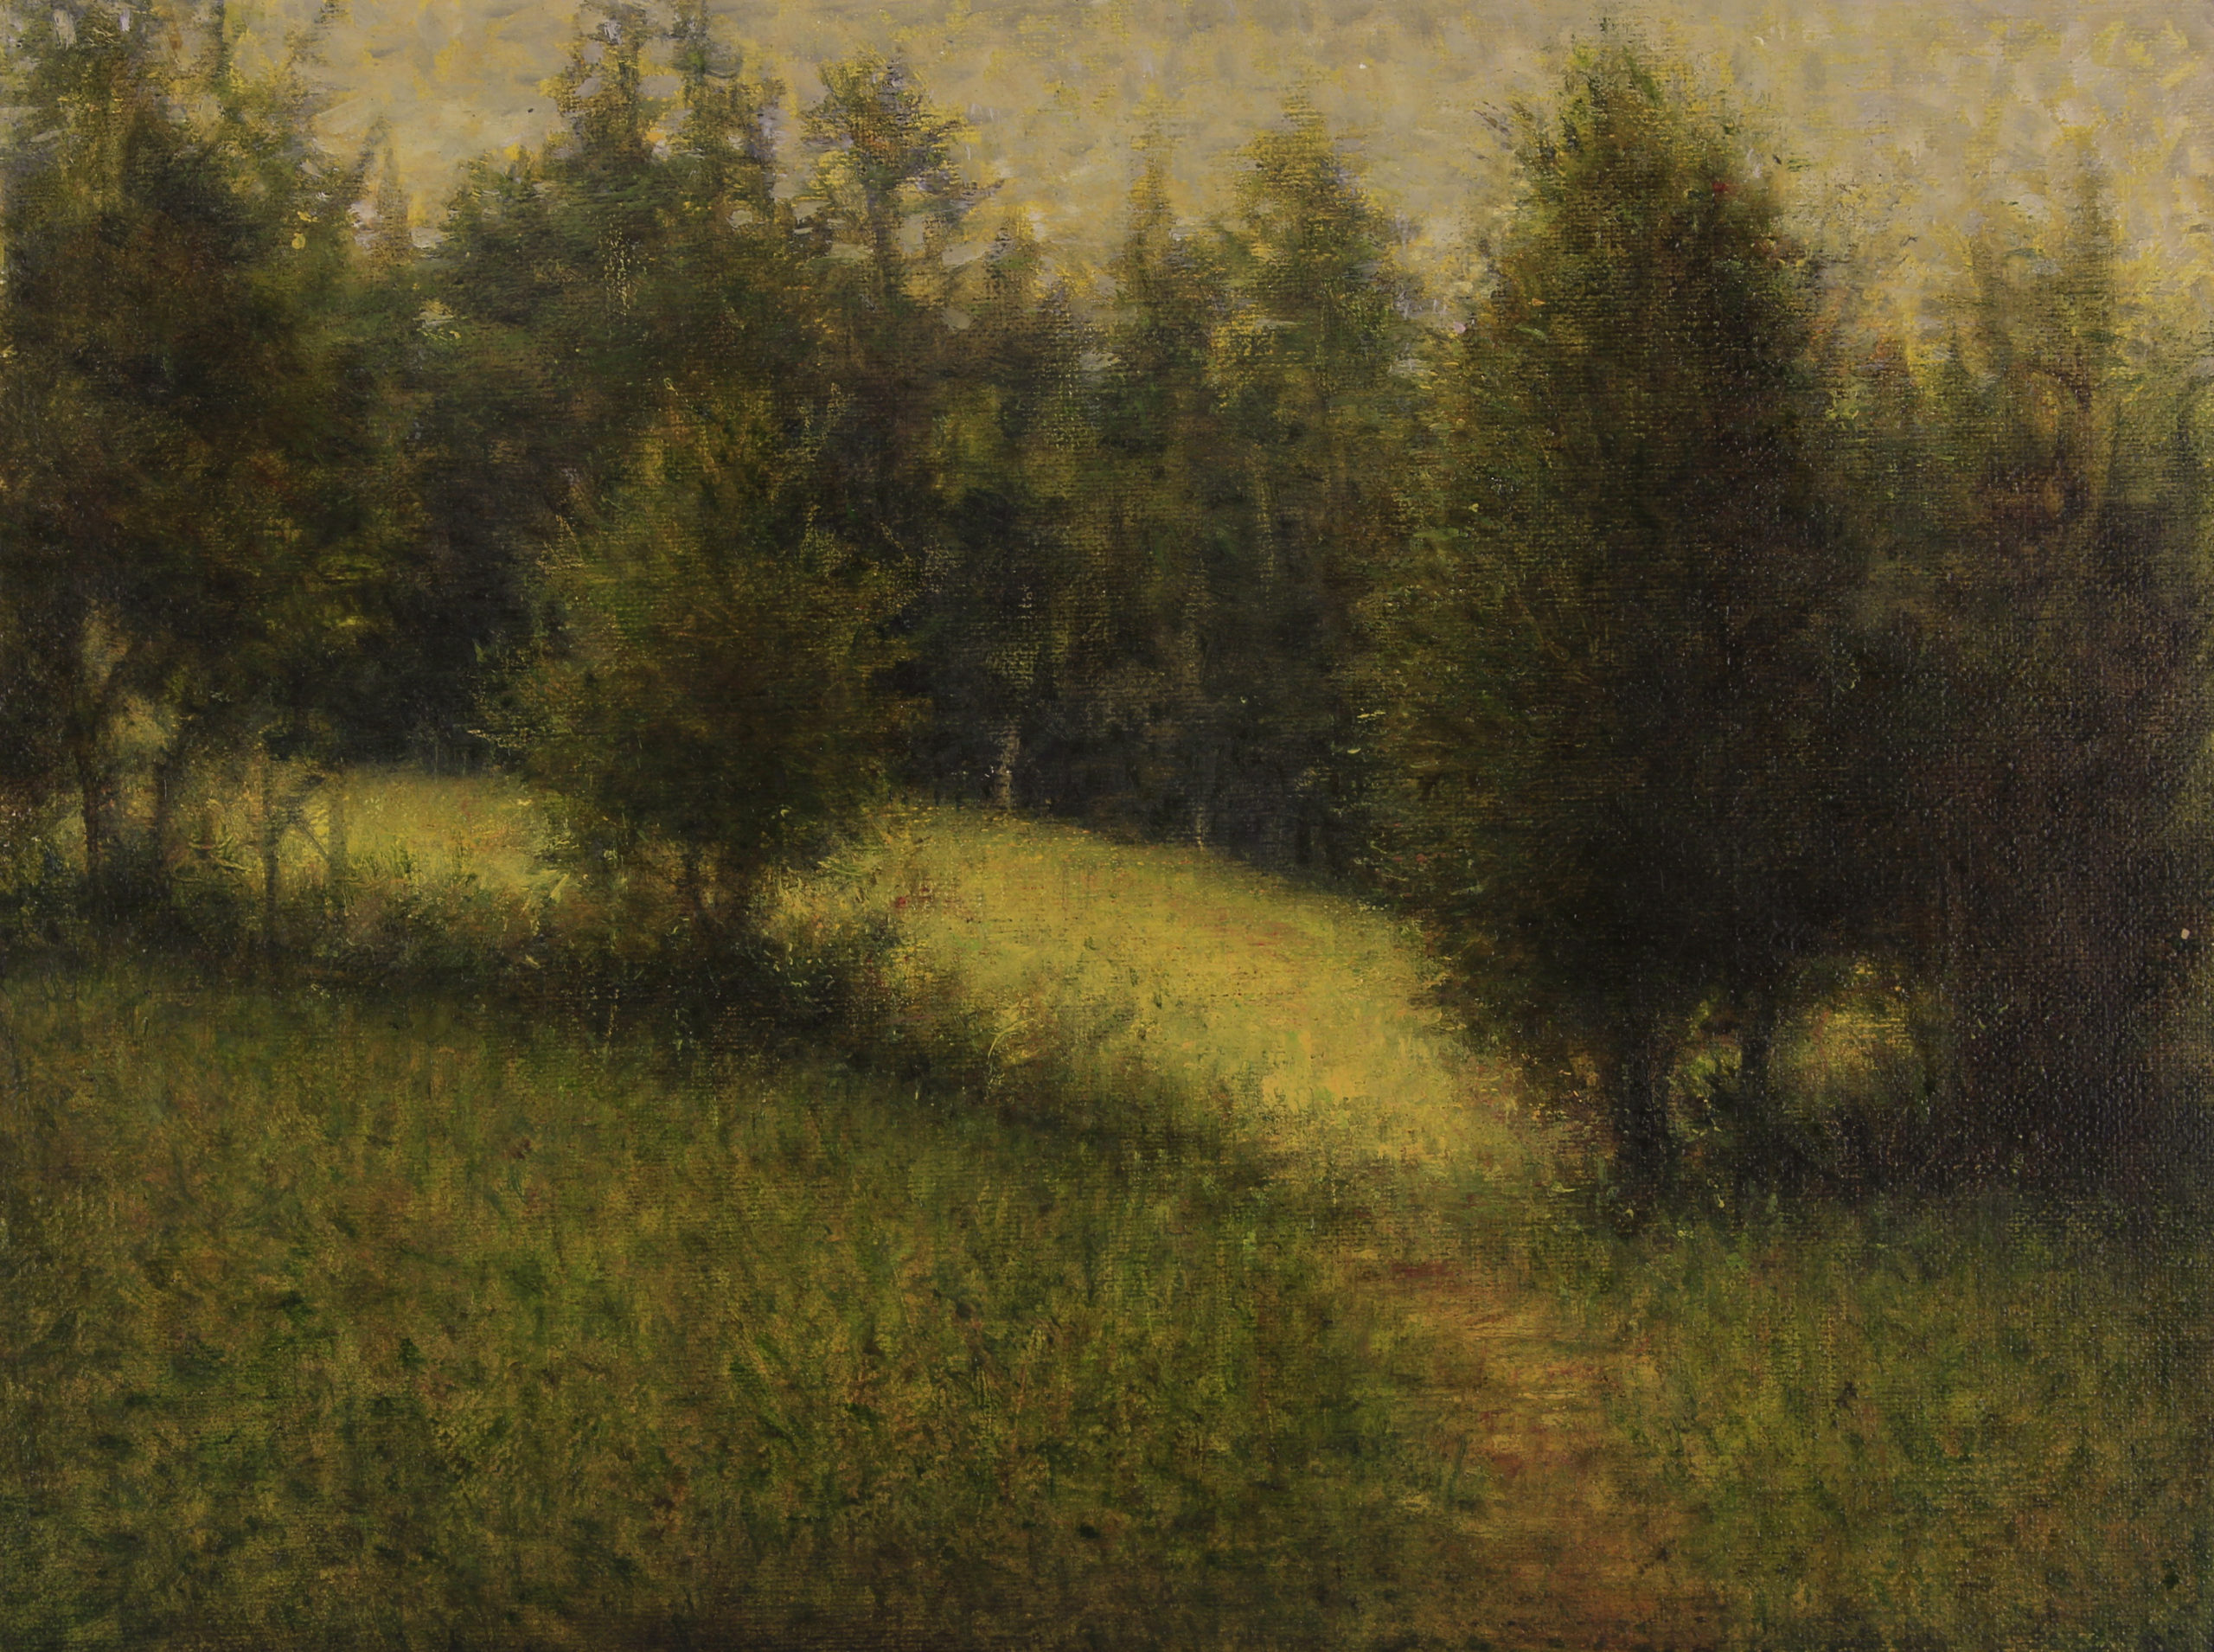 Upper Meadow by Gerry O’Neill, oil on canvas, 9×12 at Craven Allen Gallery